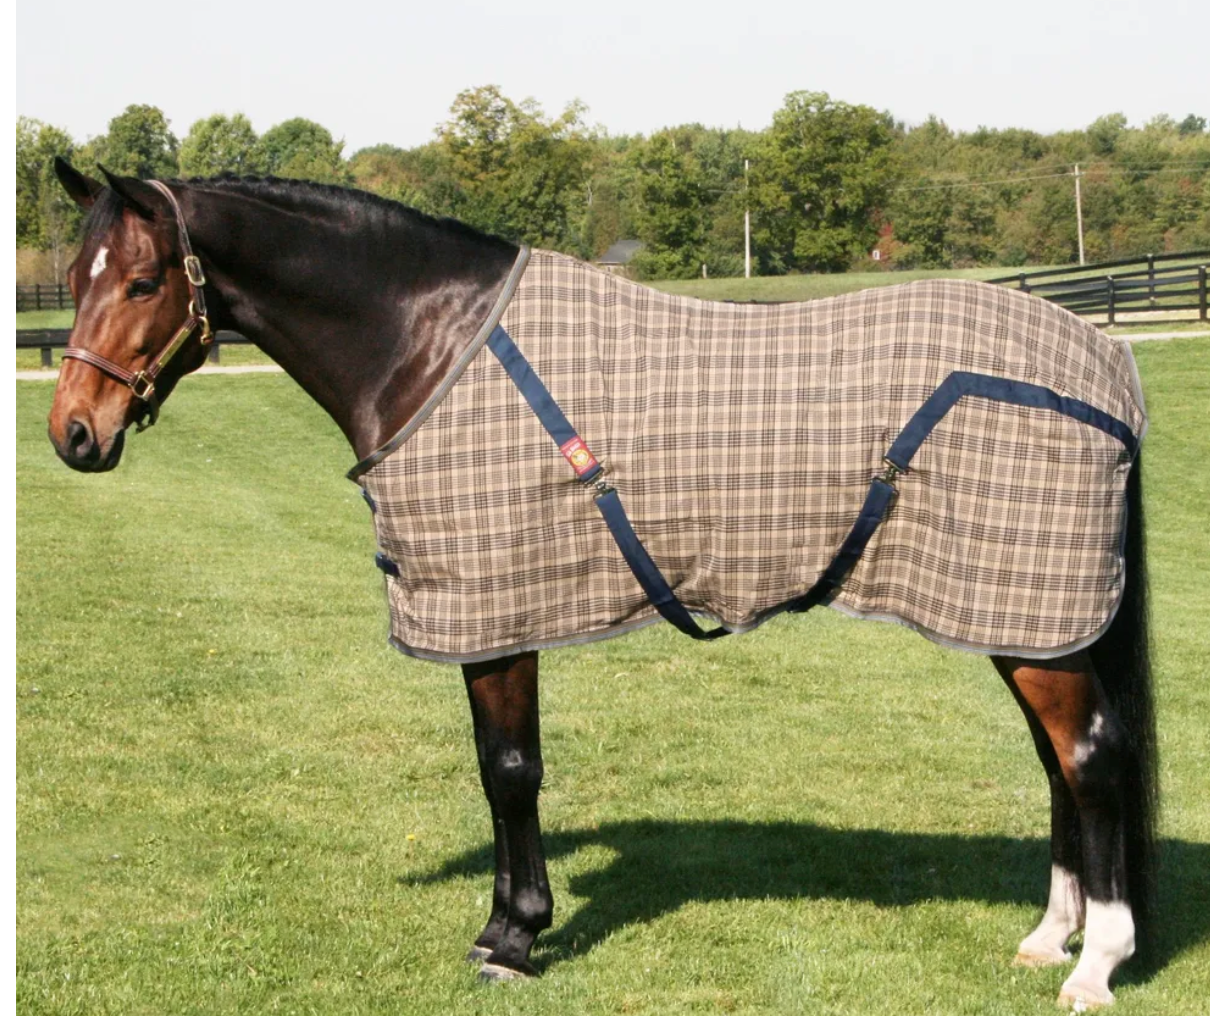 BAKER STABLE BLANKET CUSTOM WITH LEG STRAPS, FLEECE WITHERS, AND NYLON SHOULDER